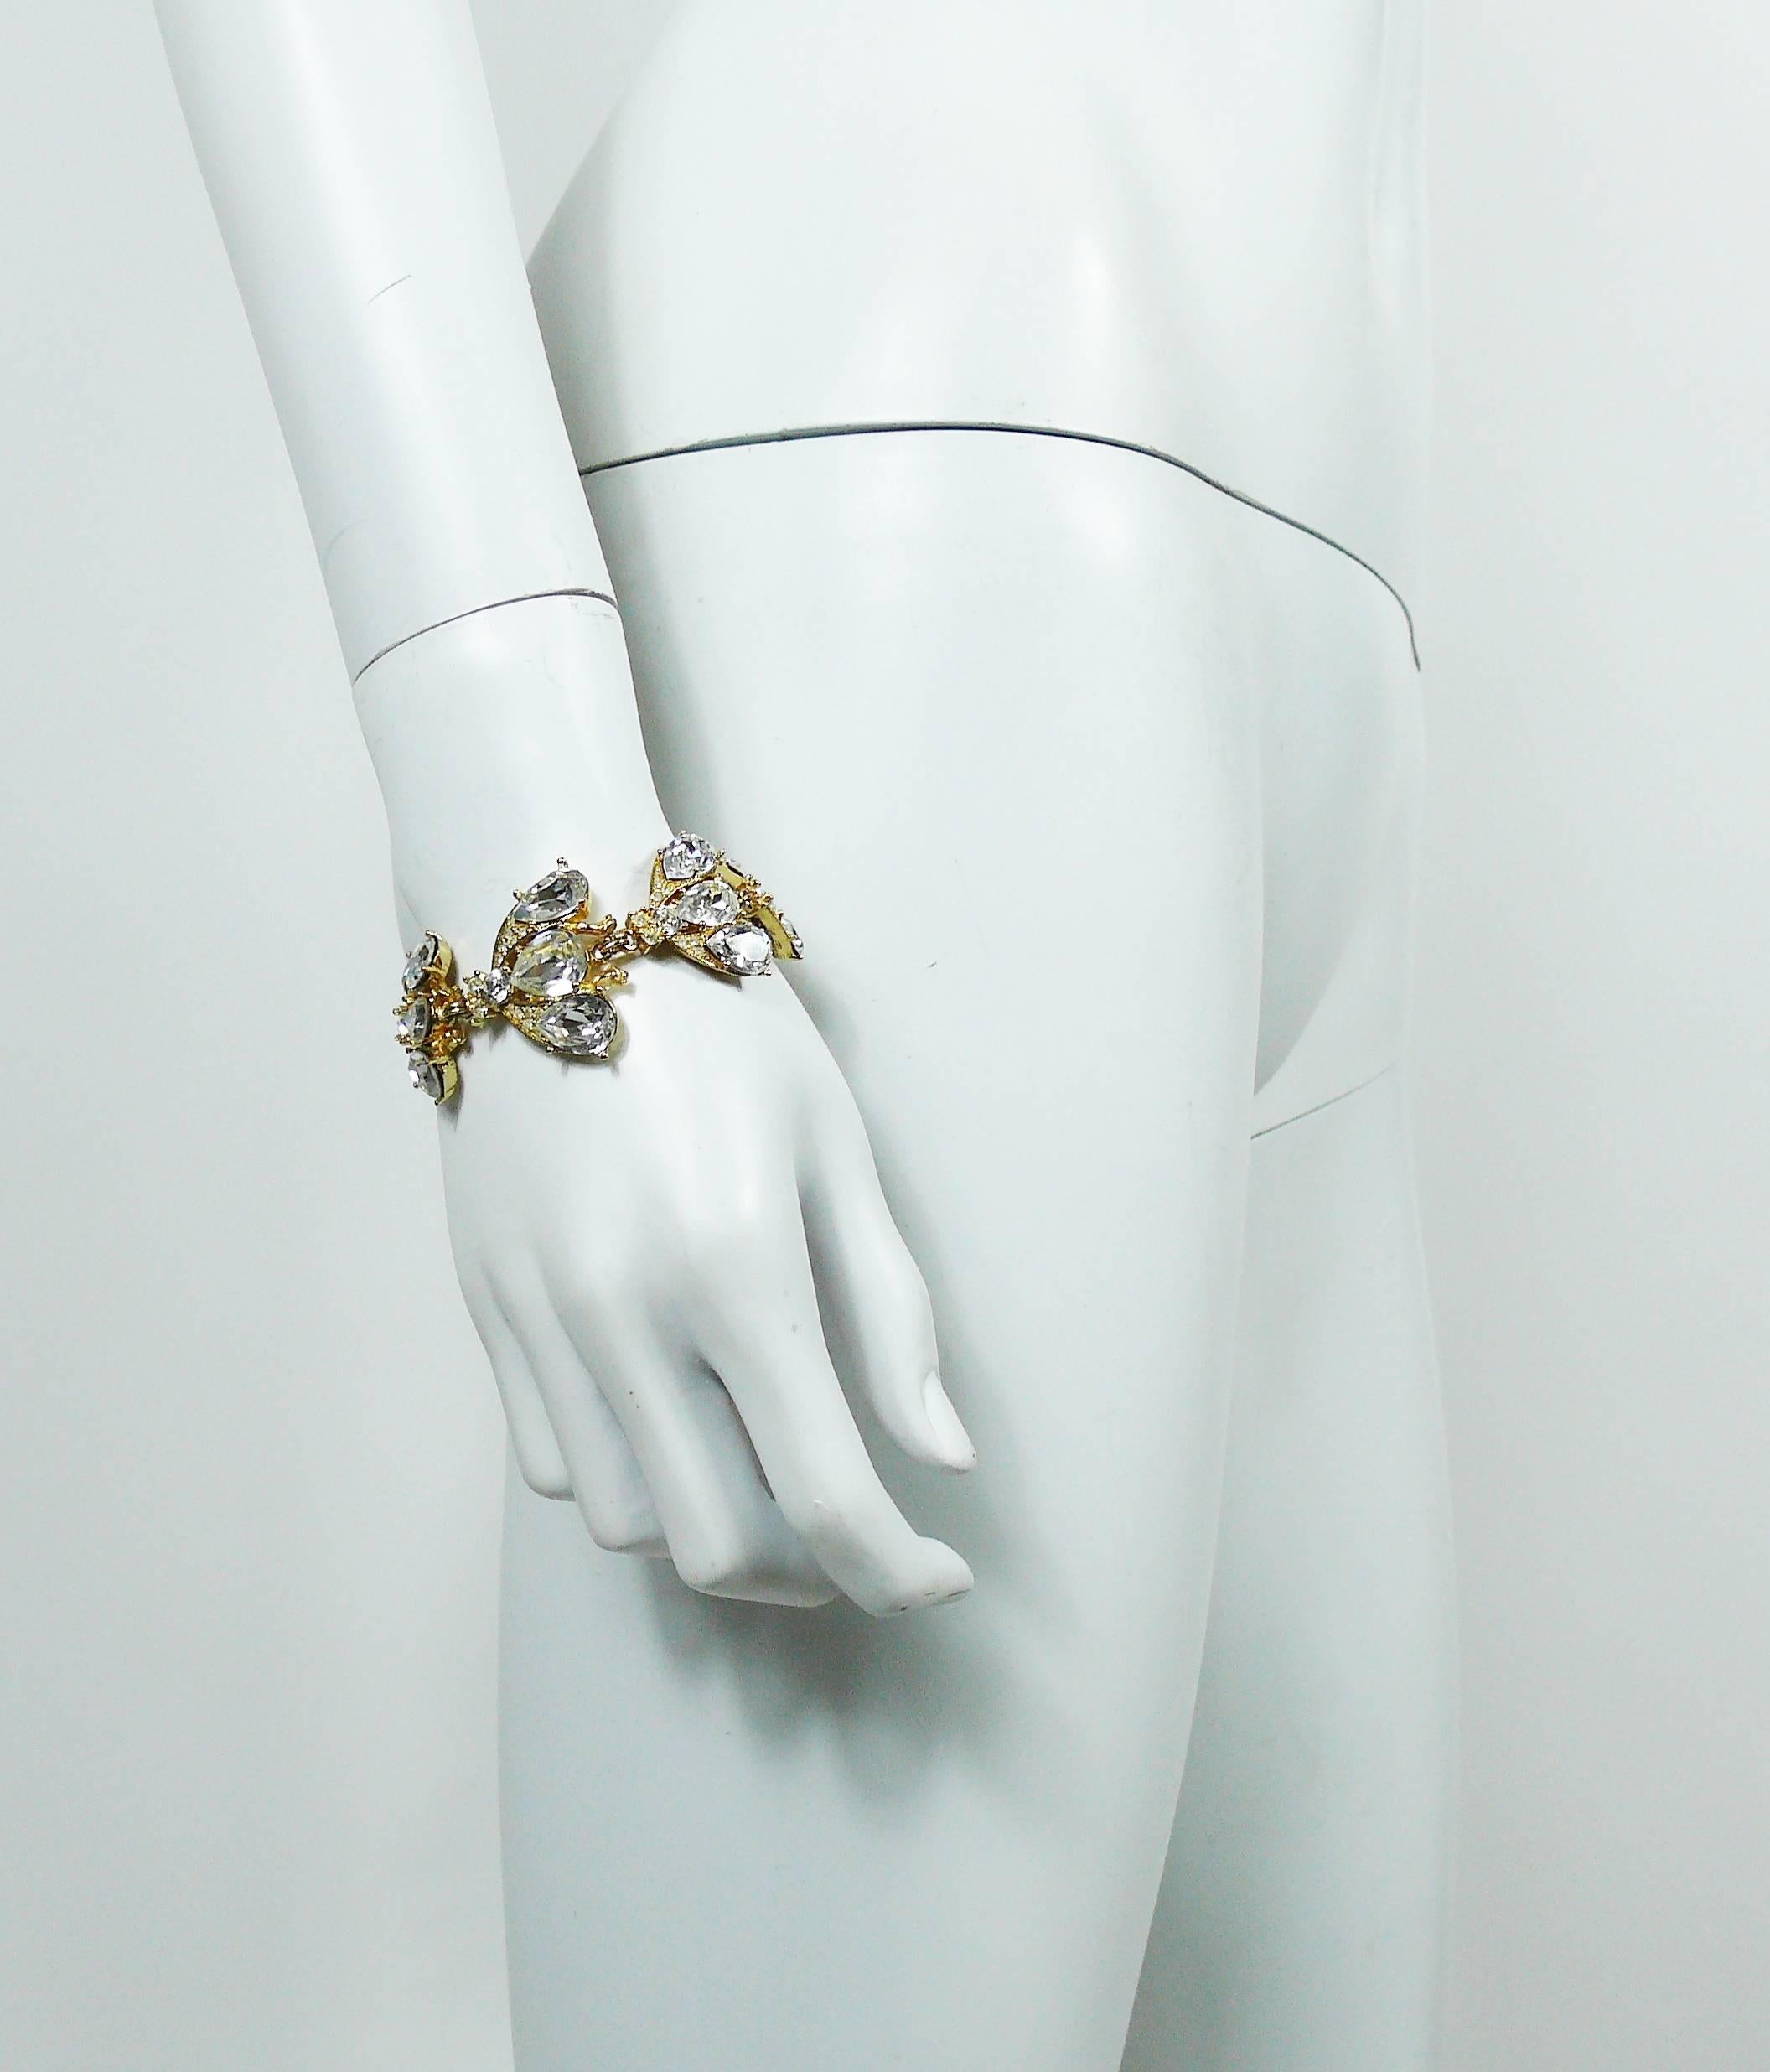 CHRISTIAN DIOR Boutique vintage iconic gold toned bracelet featuring jewelled bee links.

T-bar closure.

Marked CHRISTIAN DIOR Boutique ©.

Indicative measurements : length approx. 20 cm (7.87 inches) / max. width approx. 3.3 cm (1.30